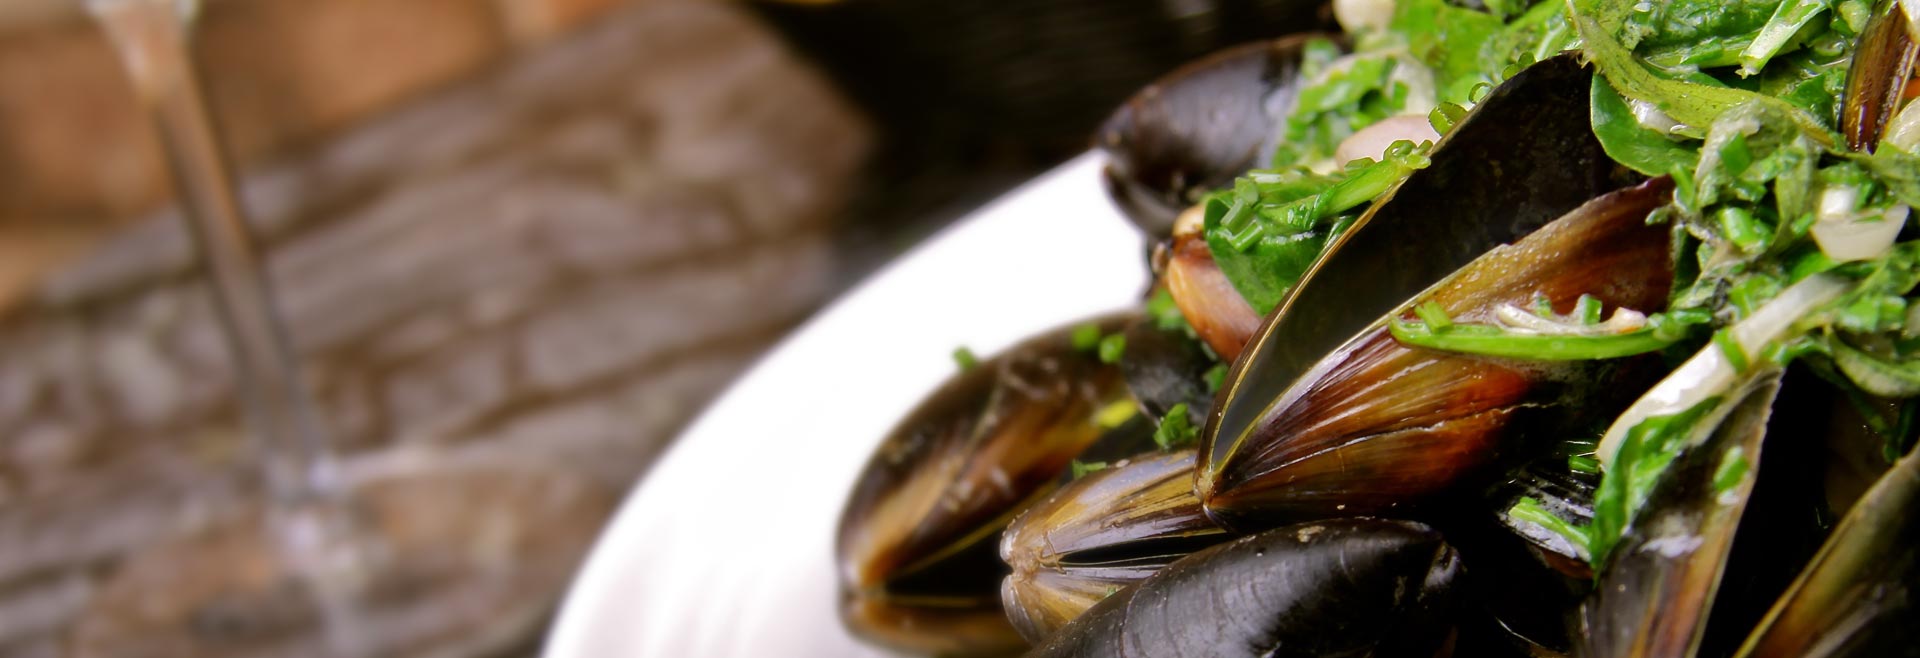 Mussels & Broth